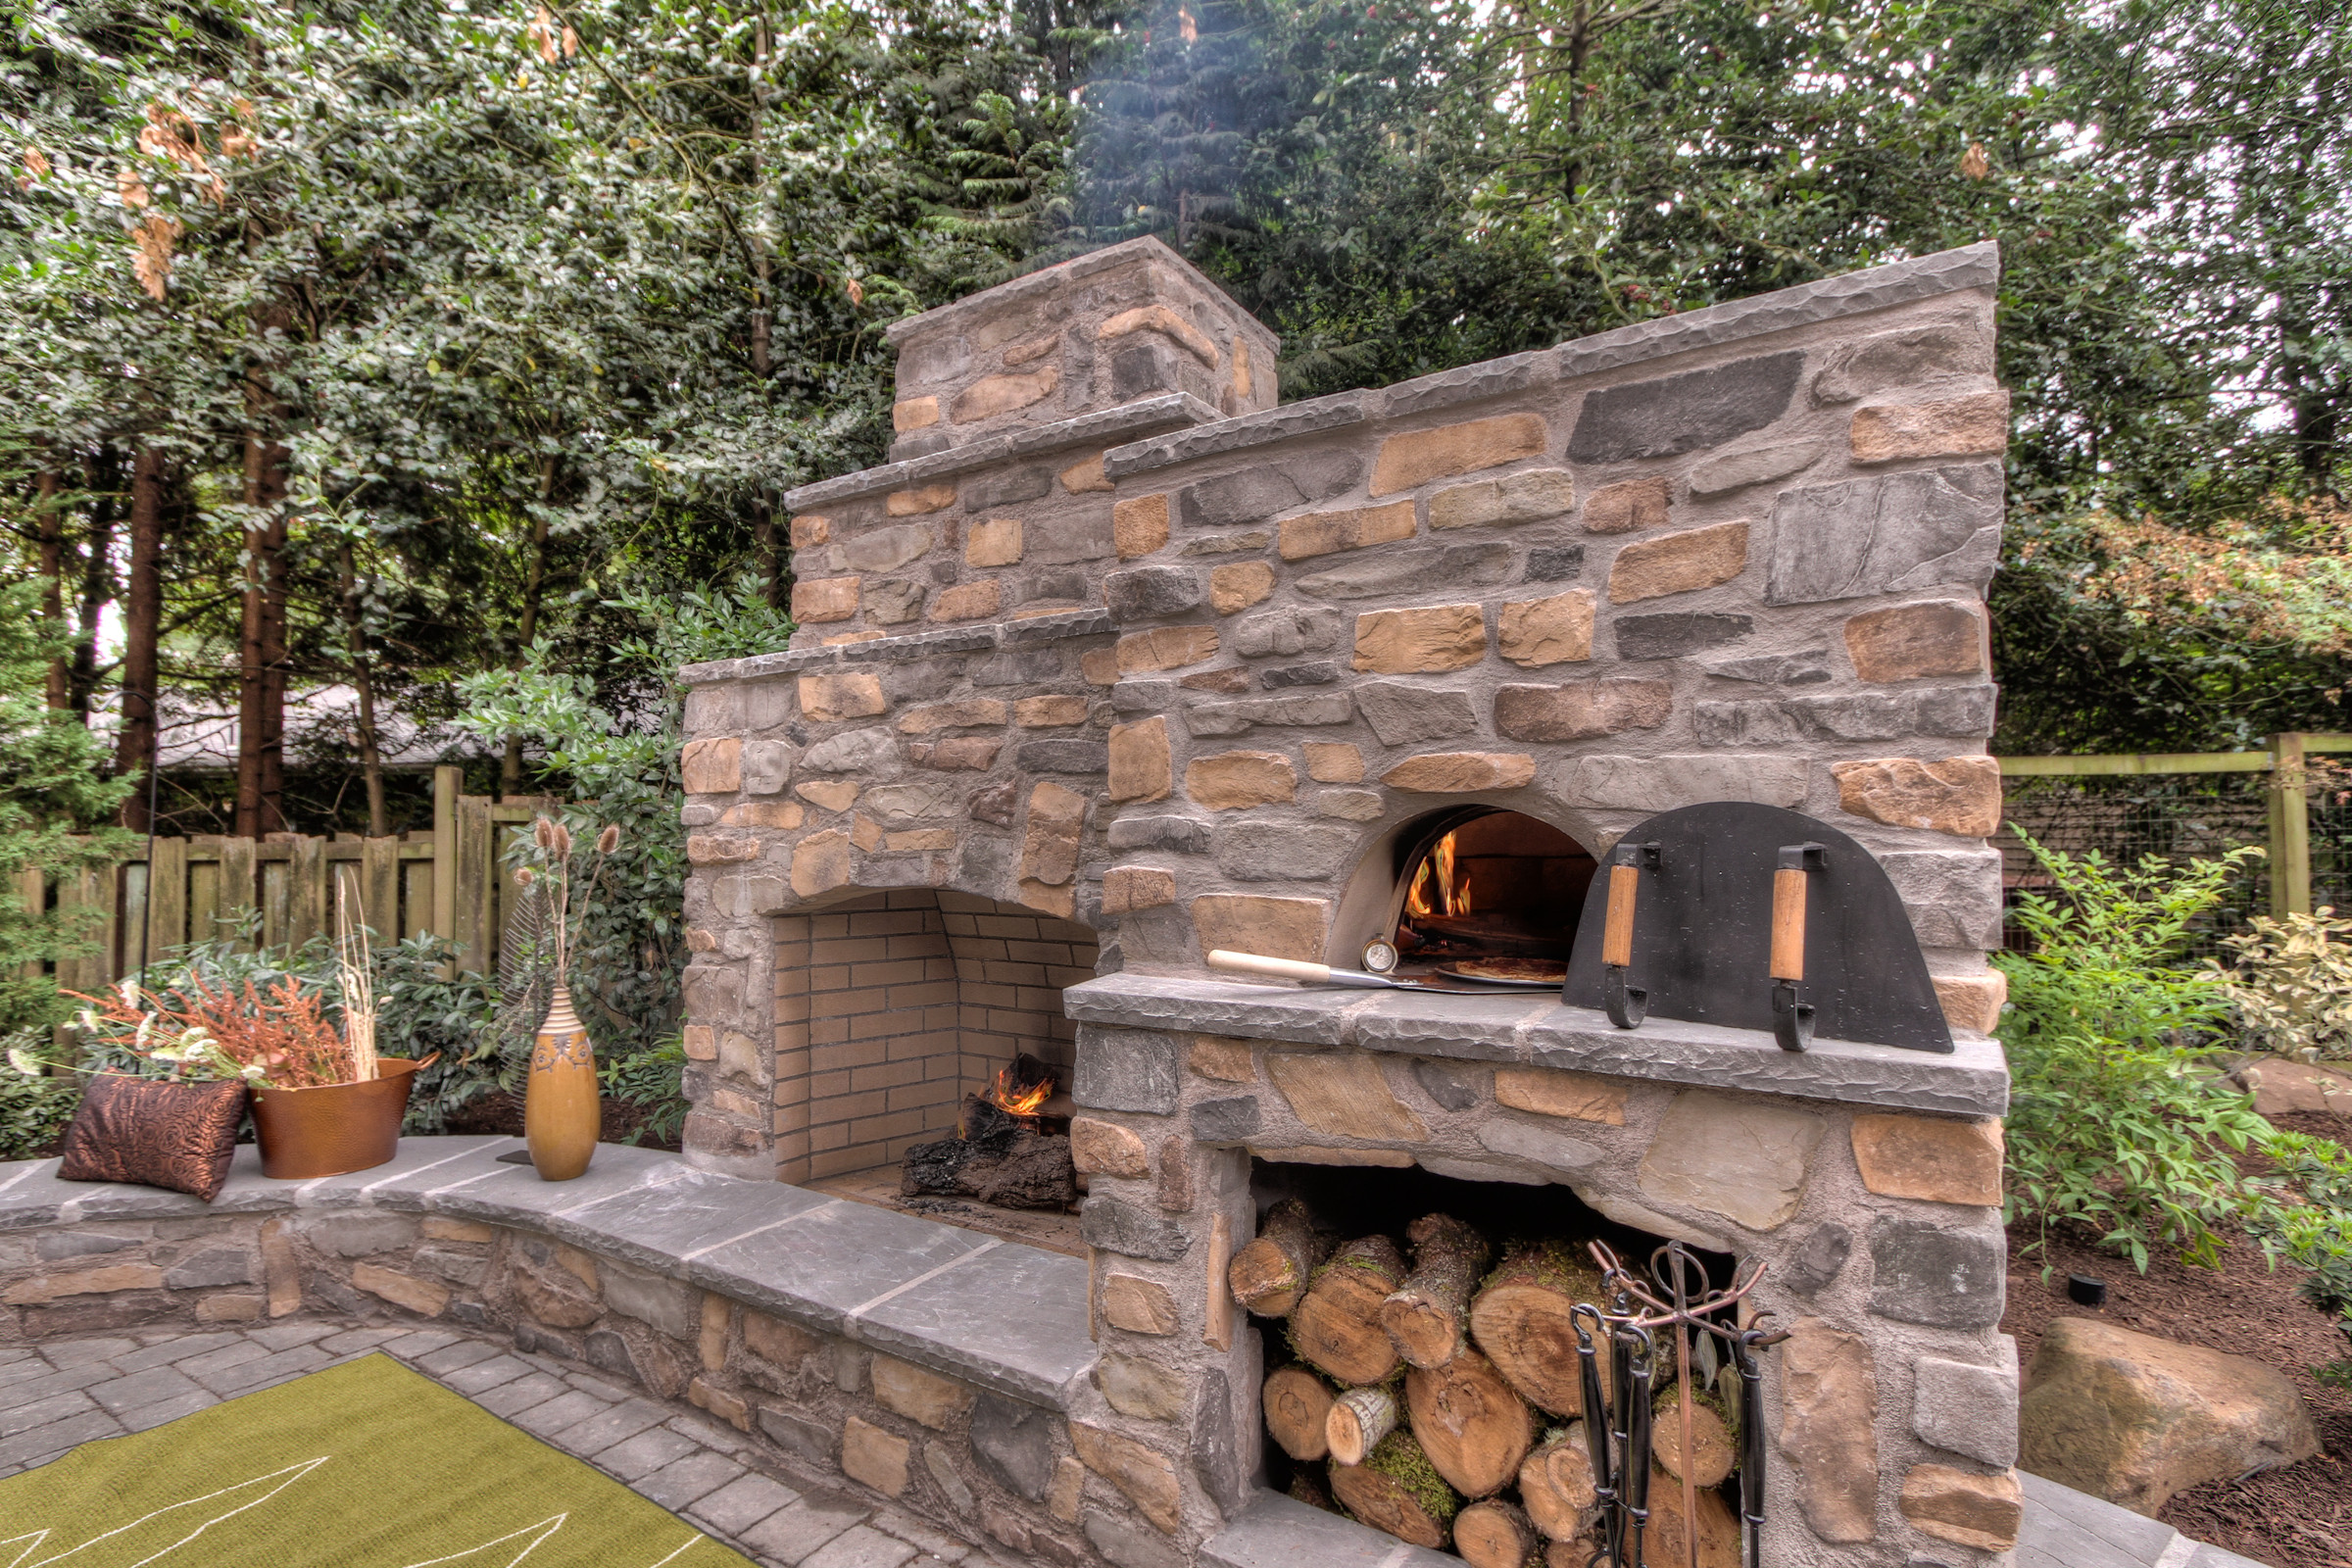 Outdoor Fireplace With Pizza Oven, Outdoor Fireplace Pizza Oven Smoker